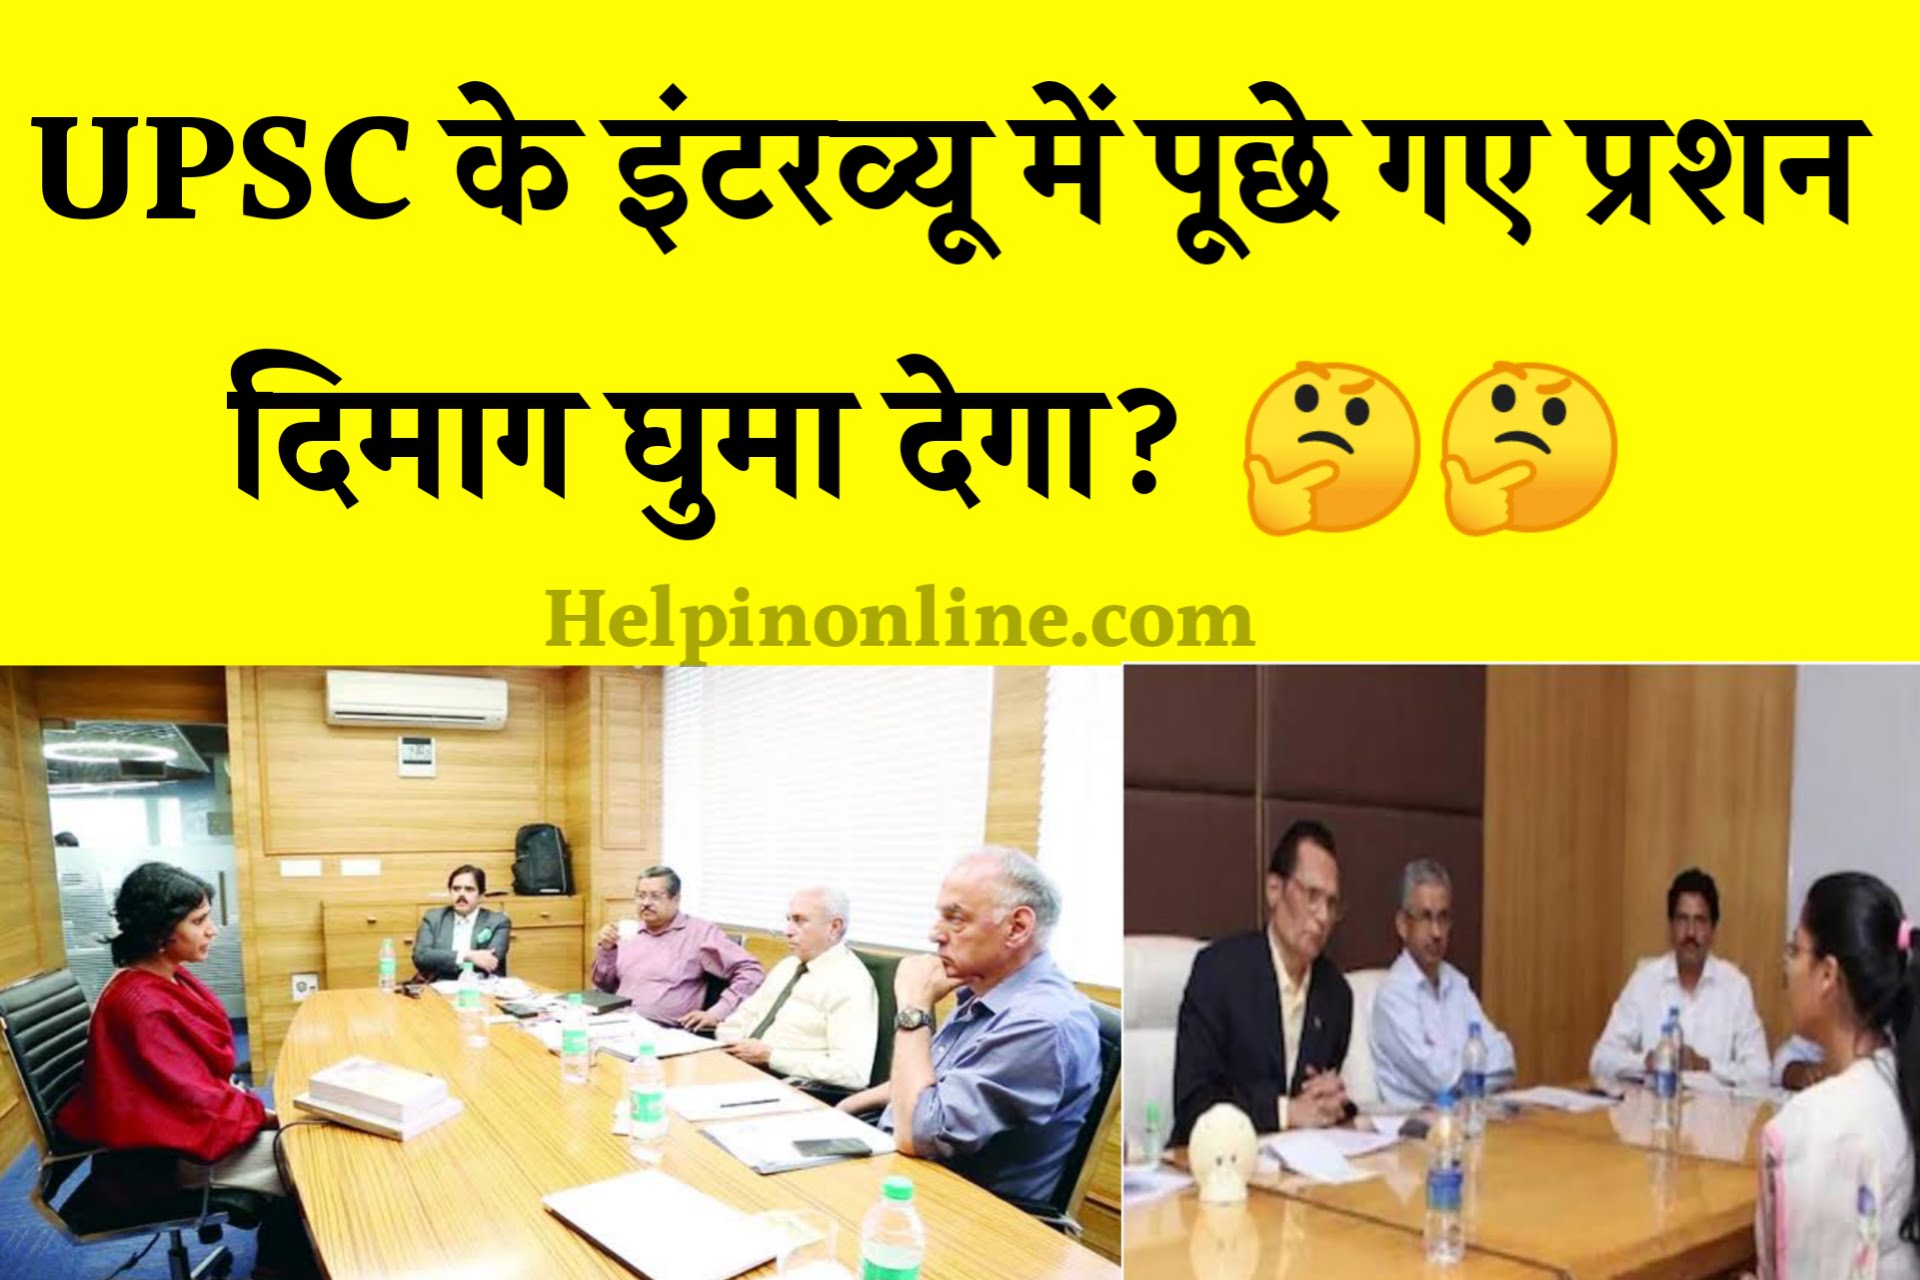 funny ias interview questions in hindi Archives | Help in online